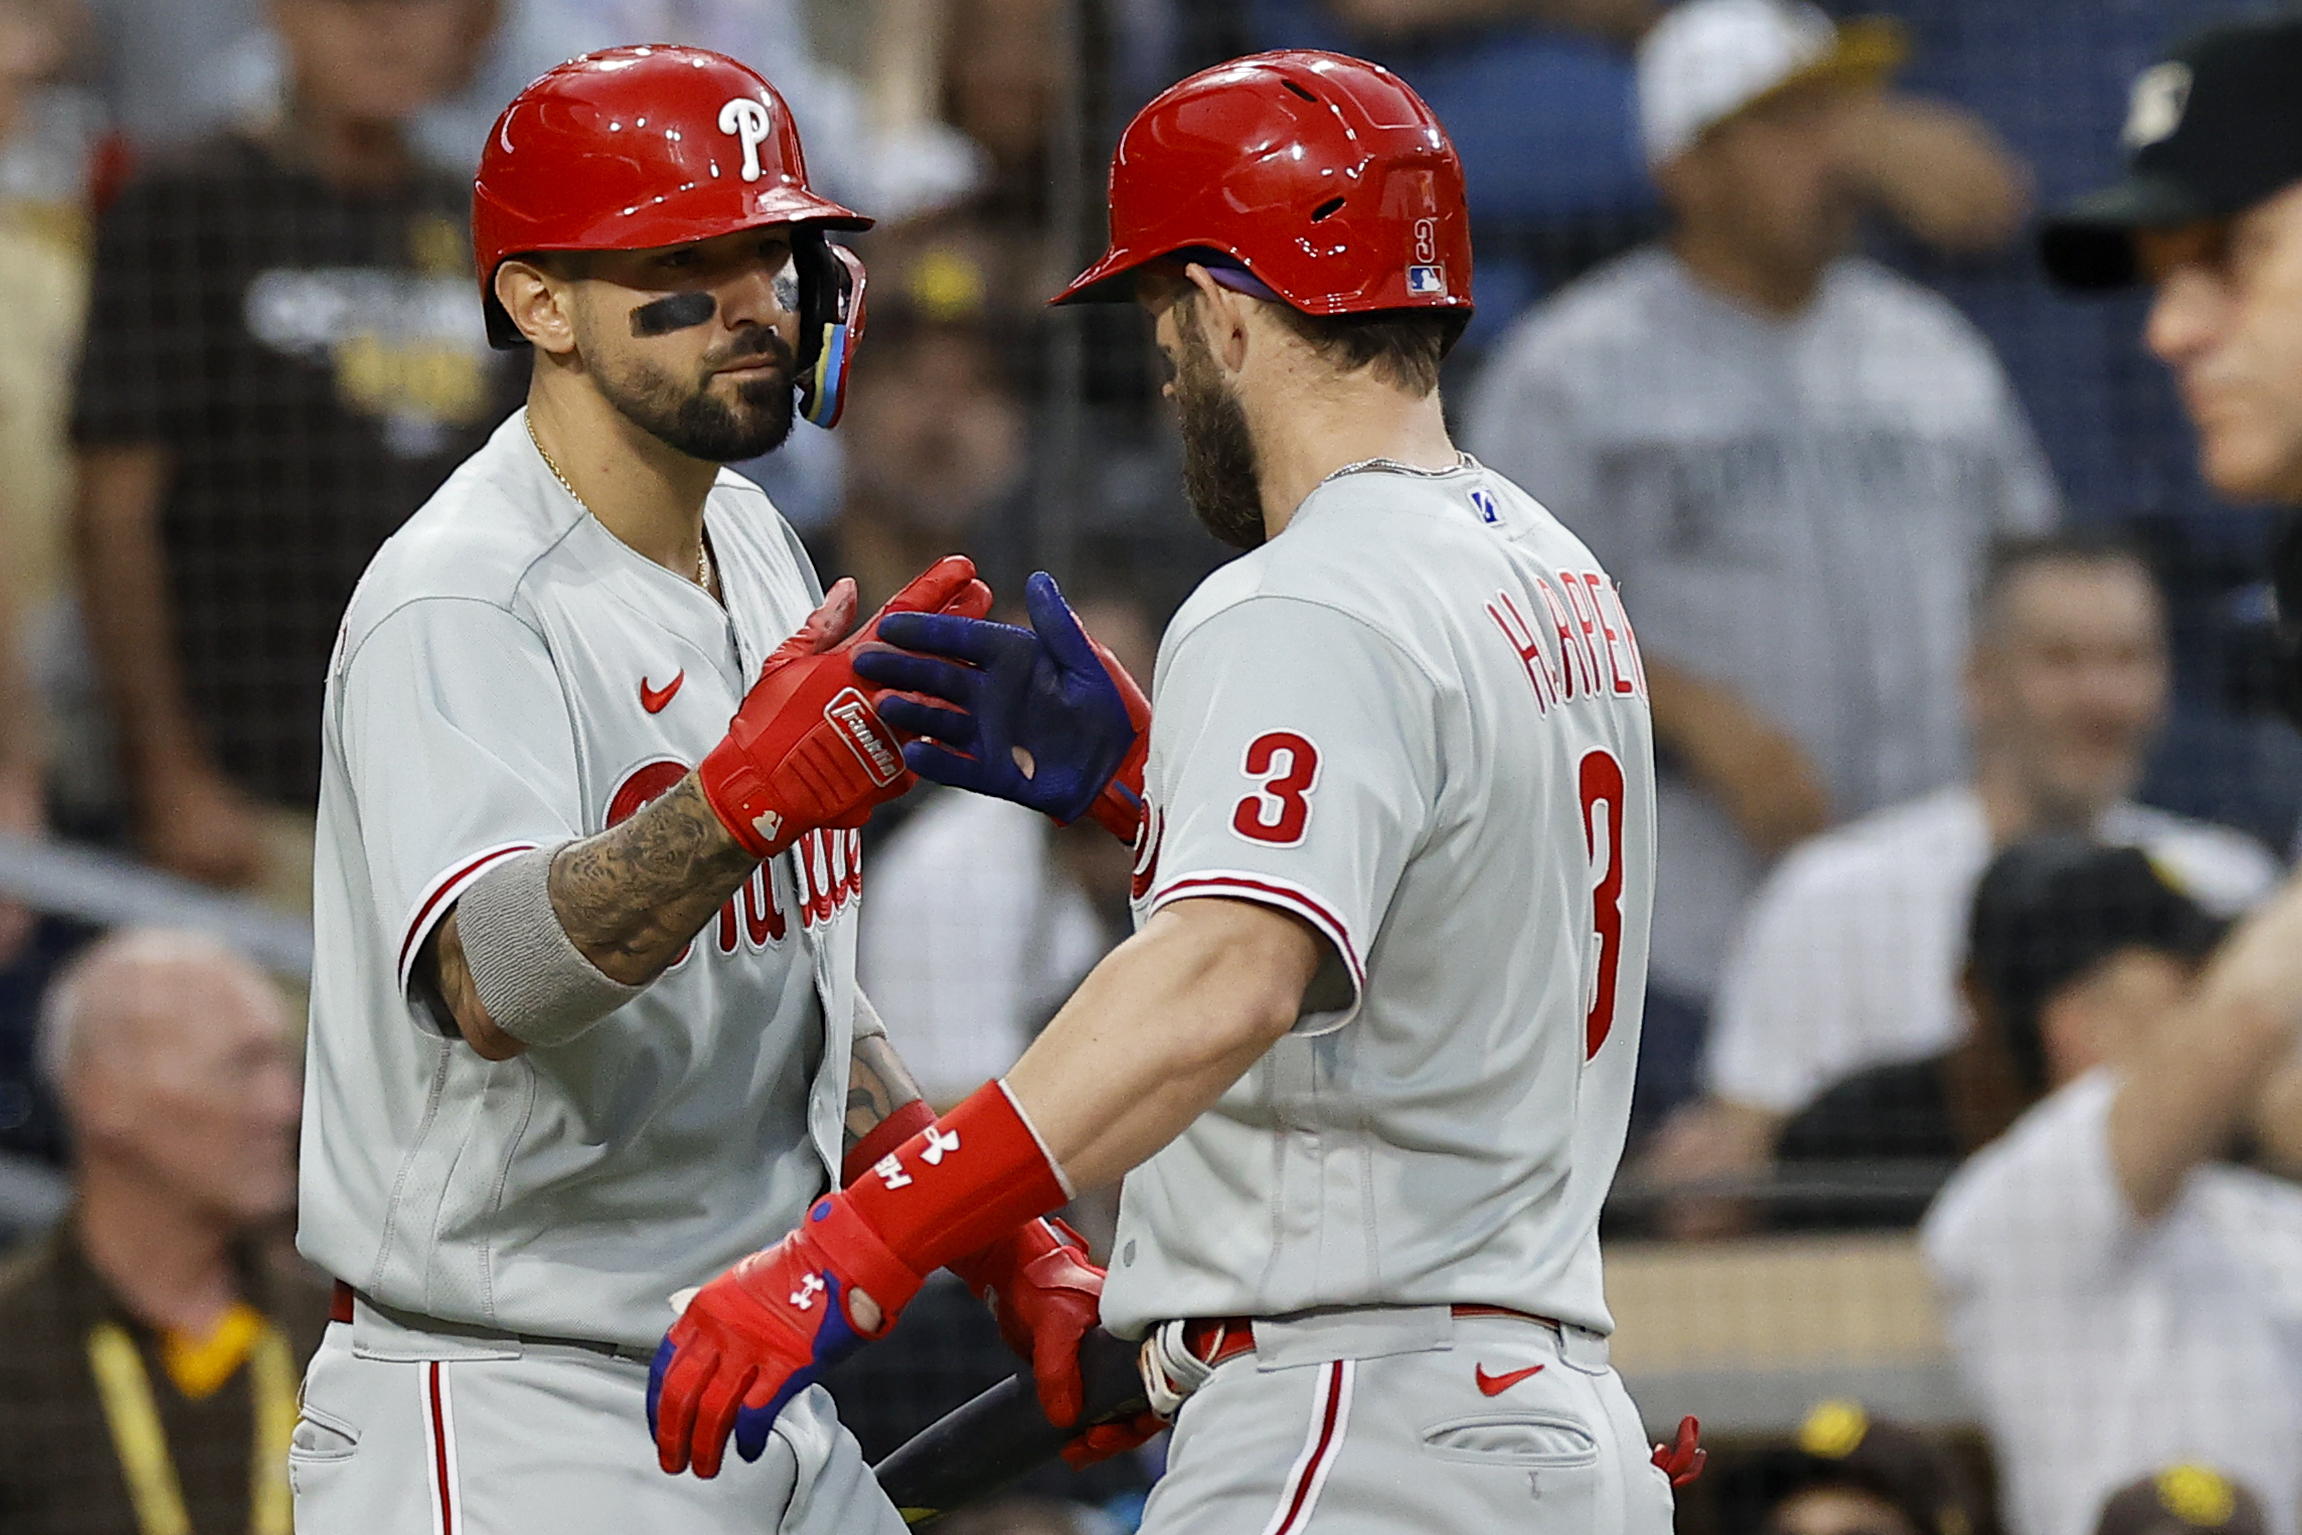 Kyle Schwarber's majestic homer lifts Phillies over Padres